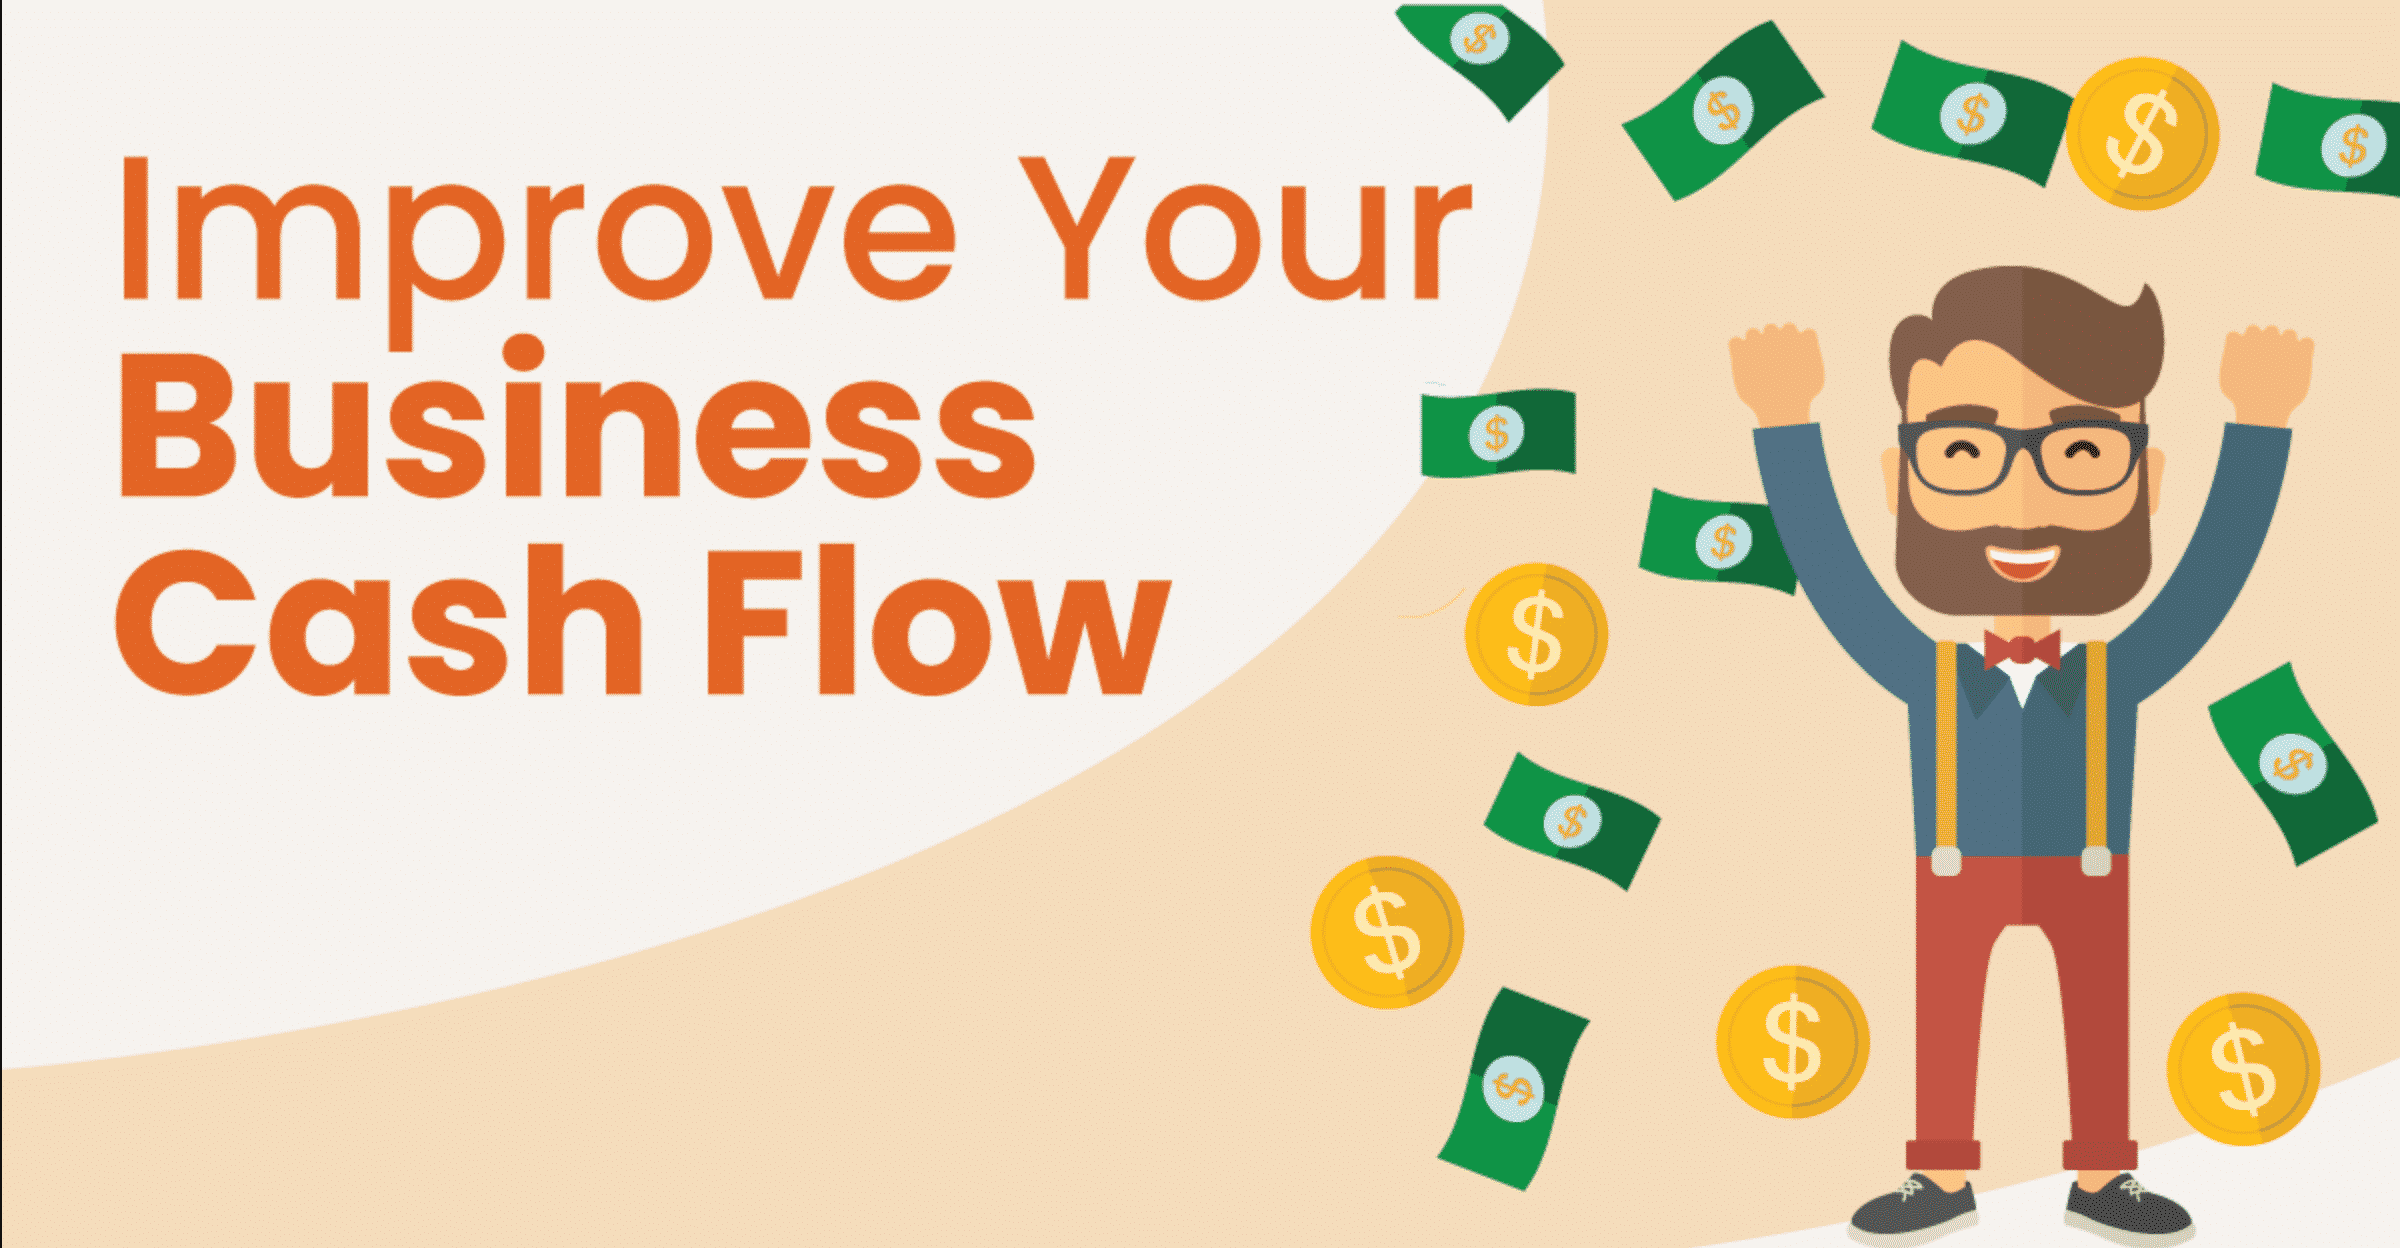 An infographic showing how to improve a business's cash flow.